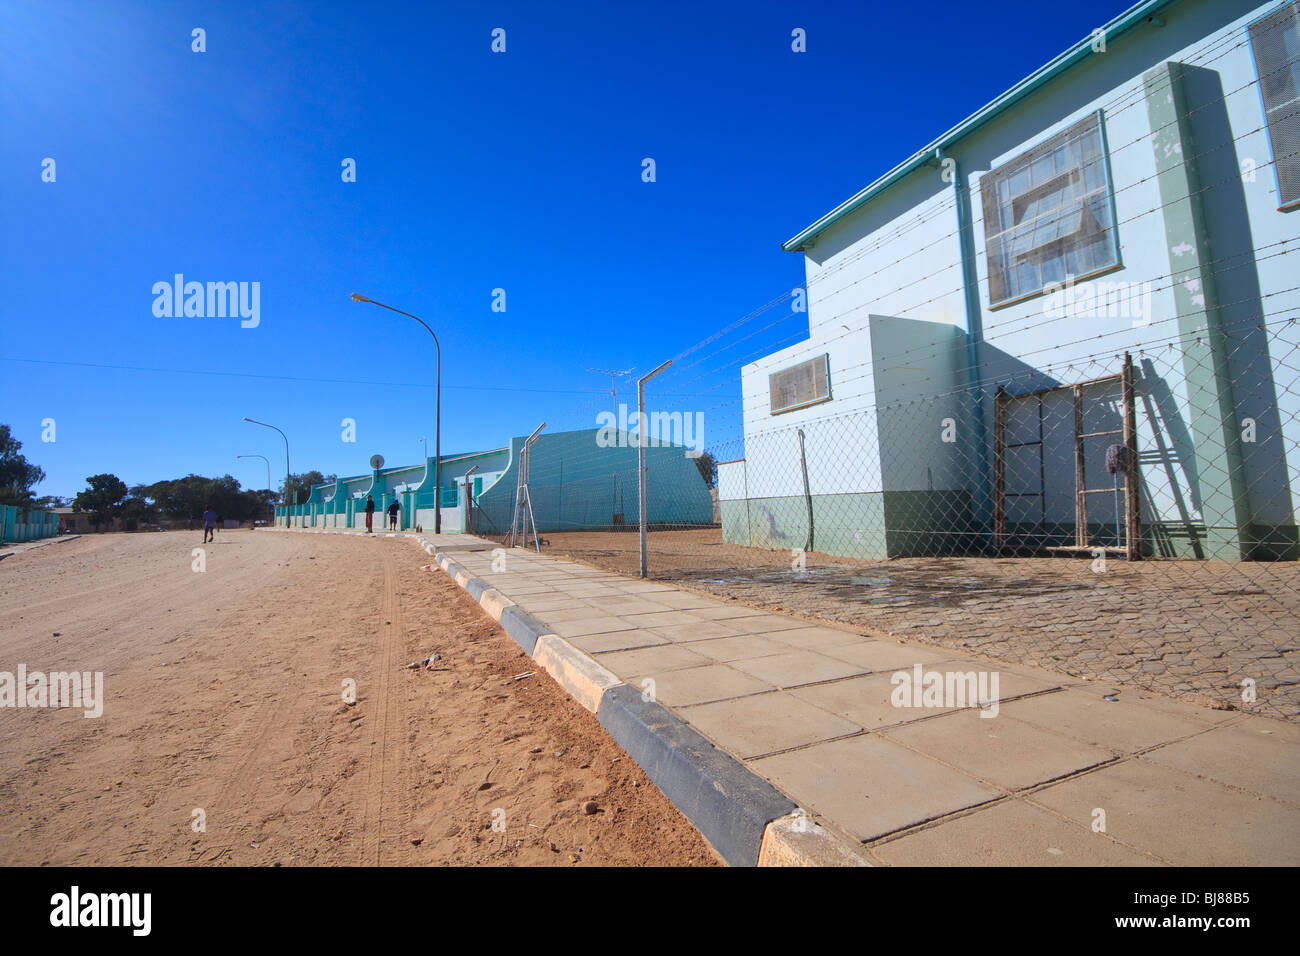 Africa Blue Sky Namibia Rehoboth Shop Store Street Stock Photo